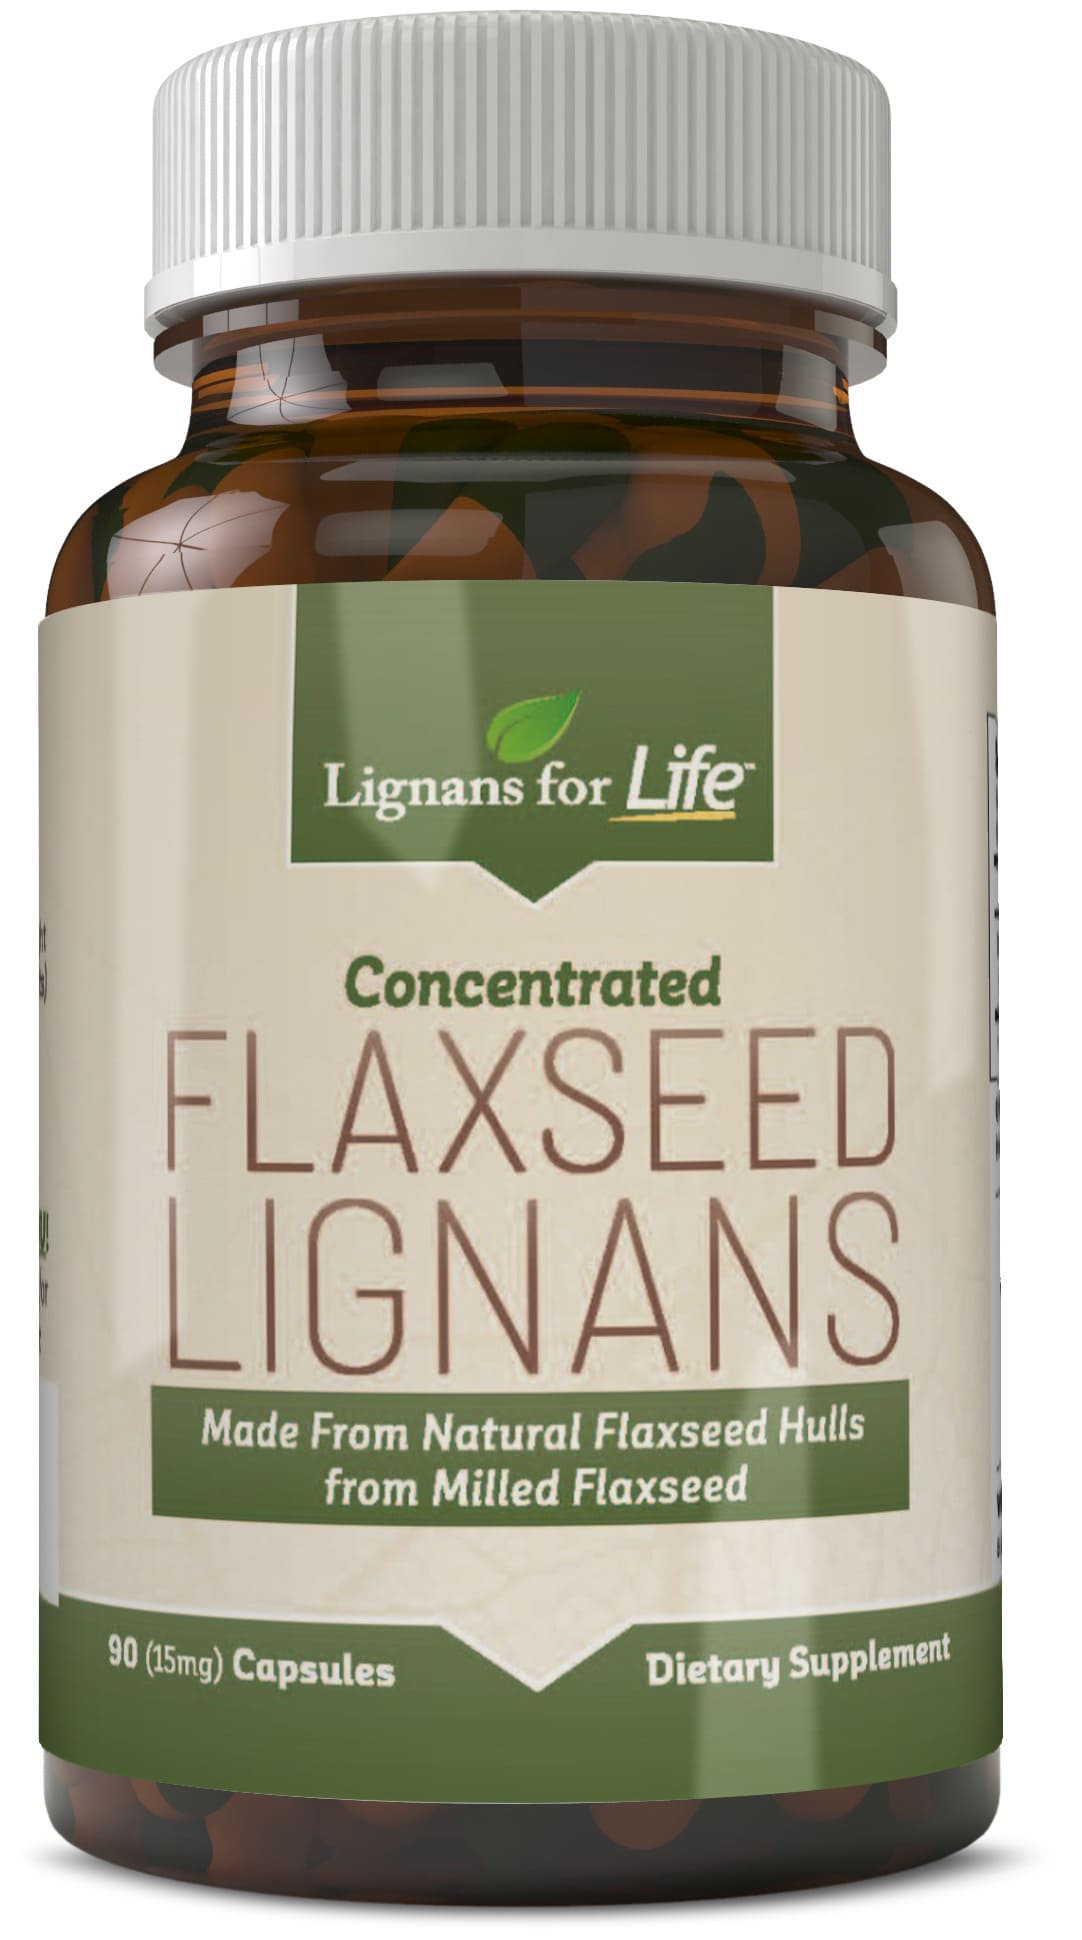 Lignans For Life Flaxseed Lignans 15 mg 90 capsules 1